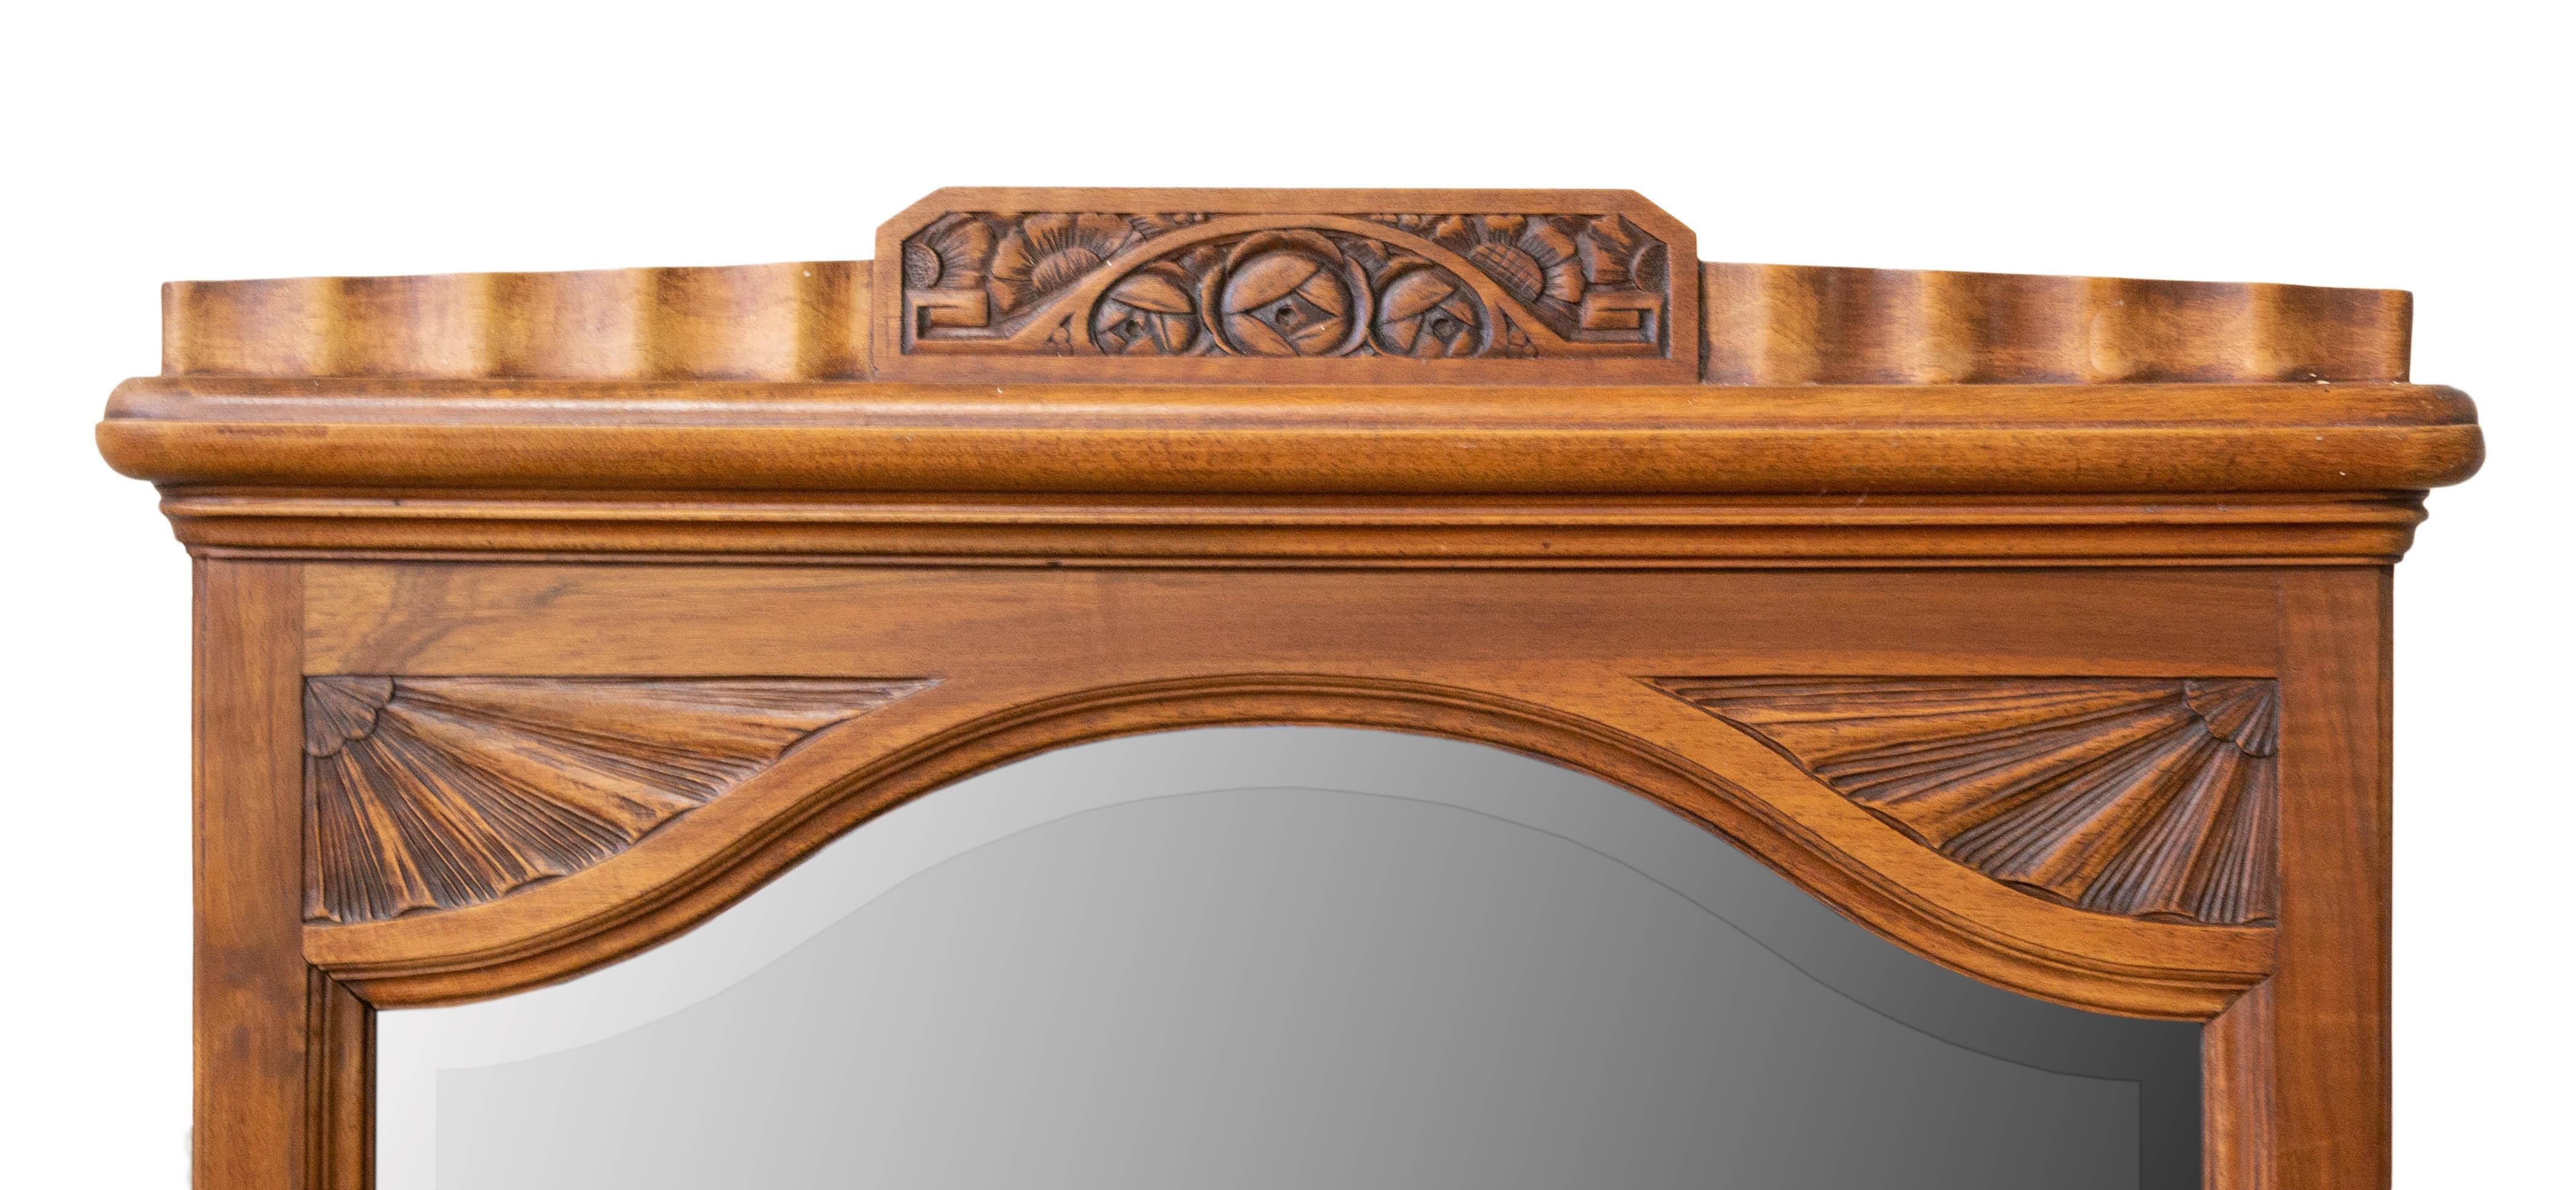 Beveled Psyche Full Length Mirror Dressing Table Drawers and Cabinet, French, circa 1930